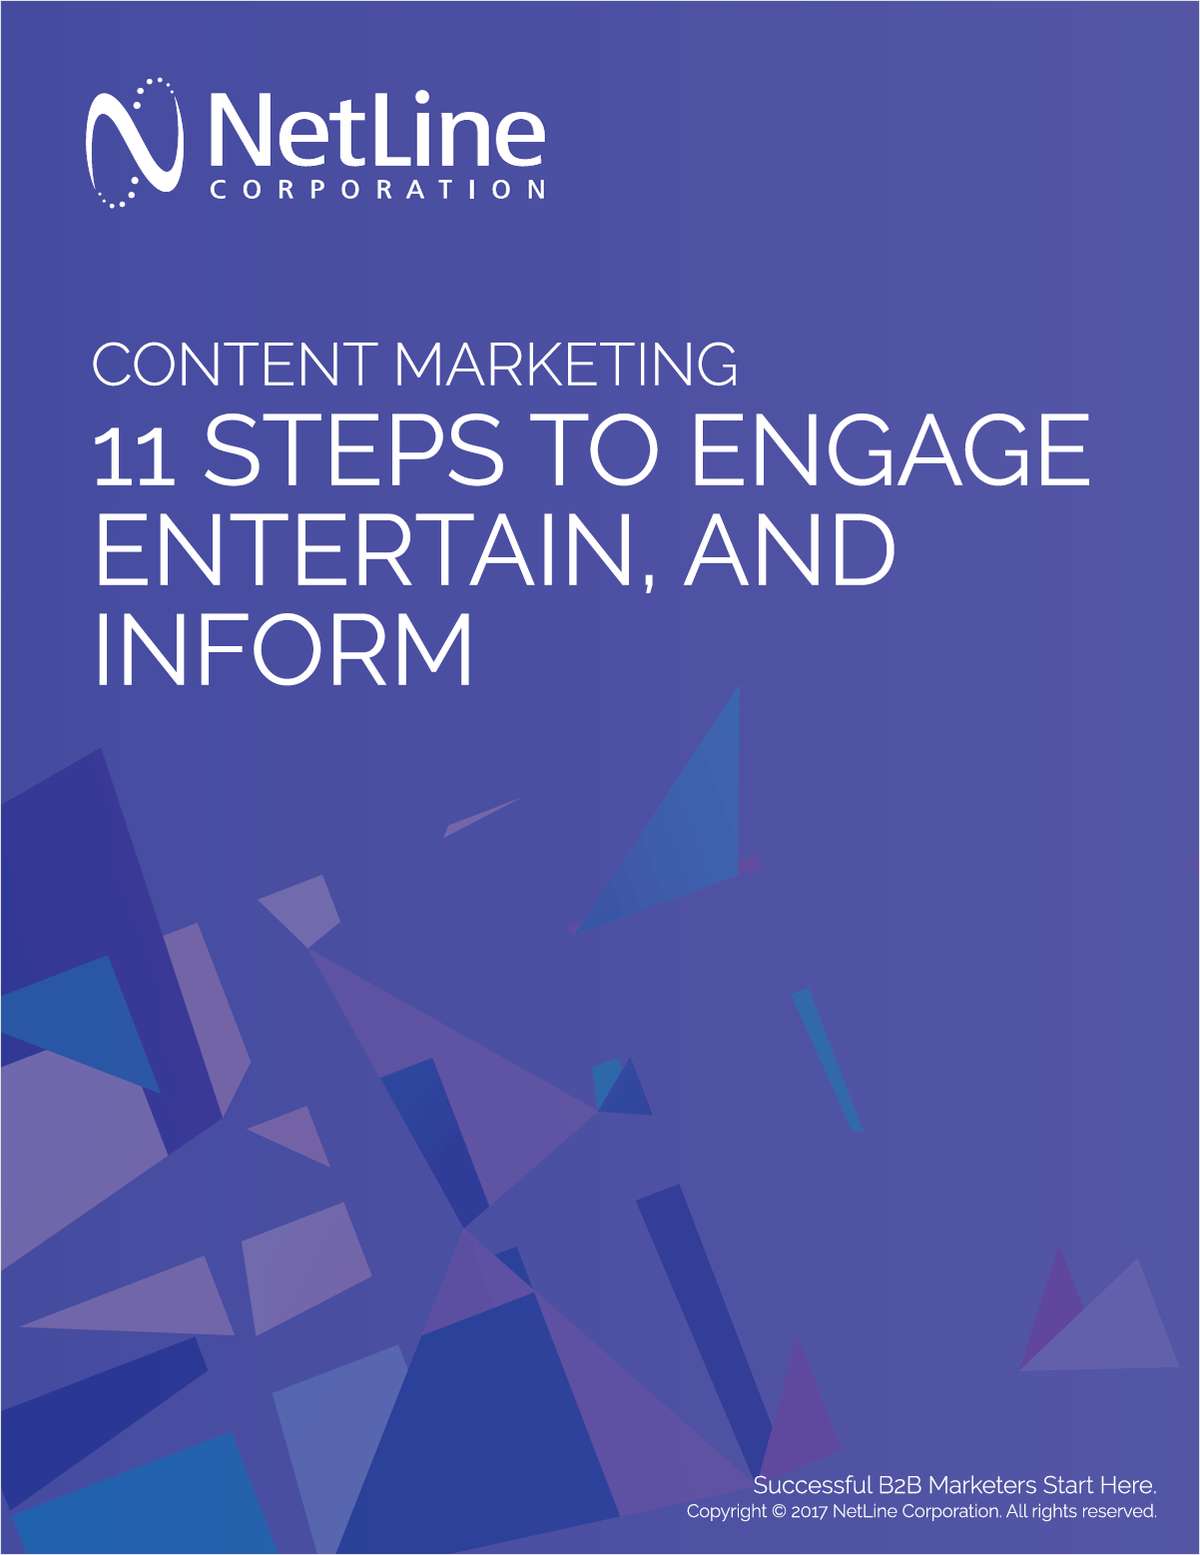 Content Marketing: 11 Steps to Engage, Entertain, and Inform